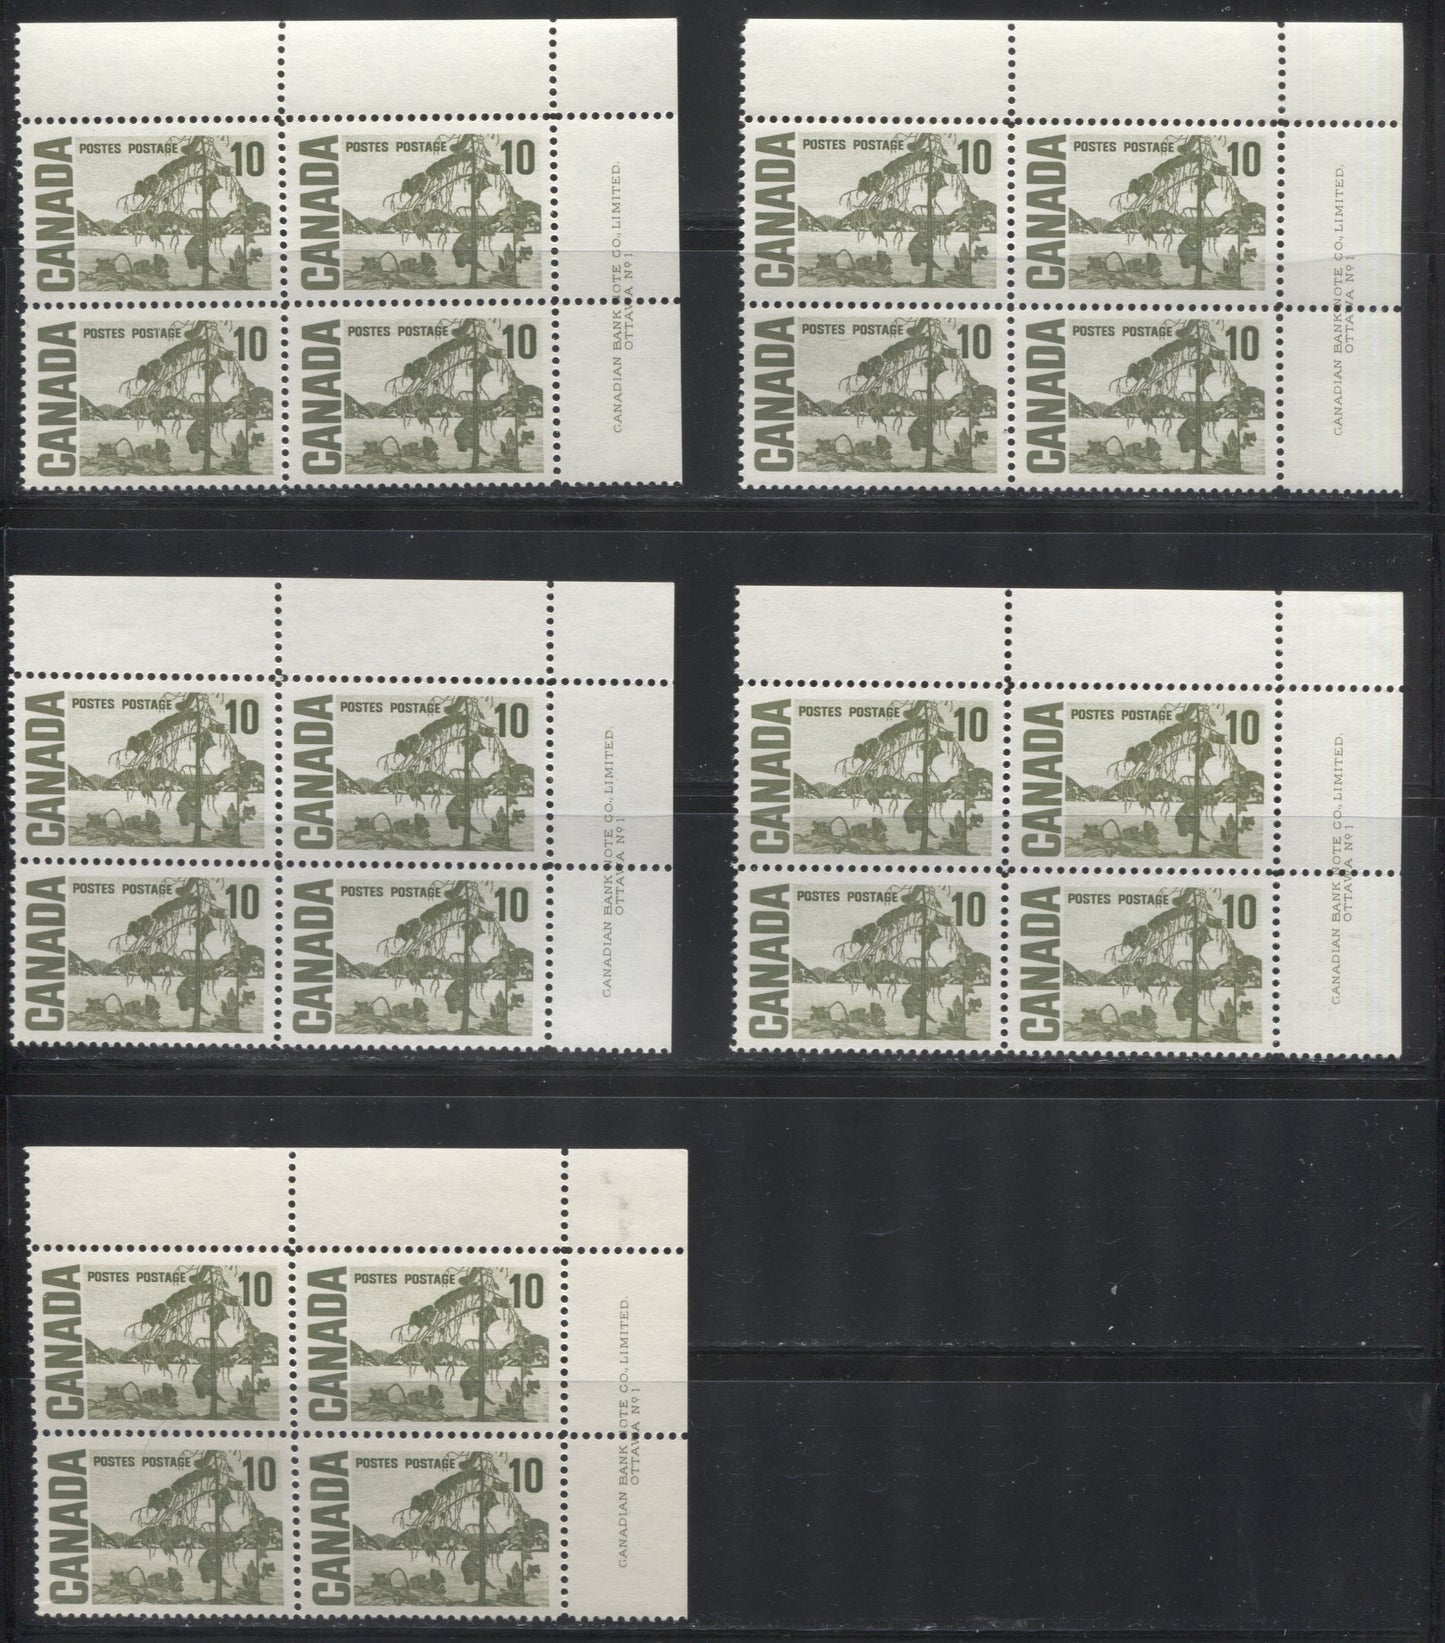 Lot 74 Canada #462 10c Olive Green Jack Pine, 1967-1973 Centennial Definitive Issue, Five VFNH UR Plate 1 Blocks Of 4 On DF Horizontal Wove Papers, Different Ink Fluorescenses Under UV And Smooth & Streaky Dex Gums